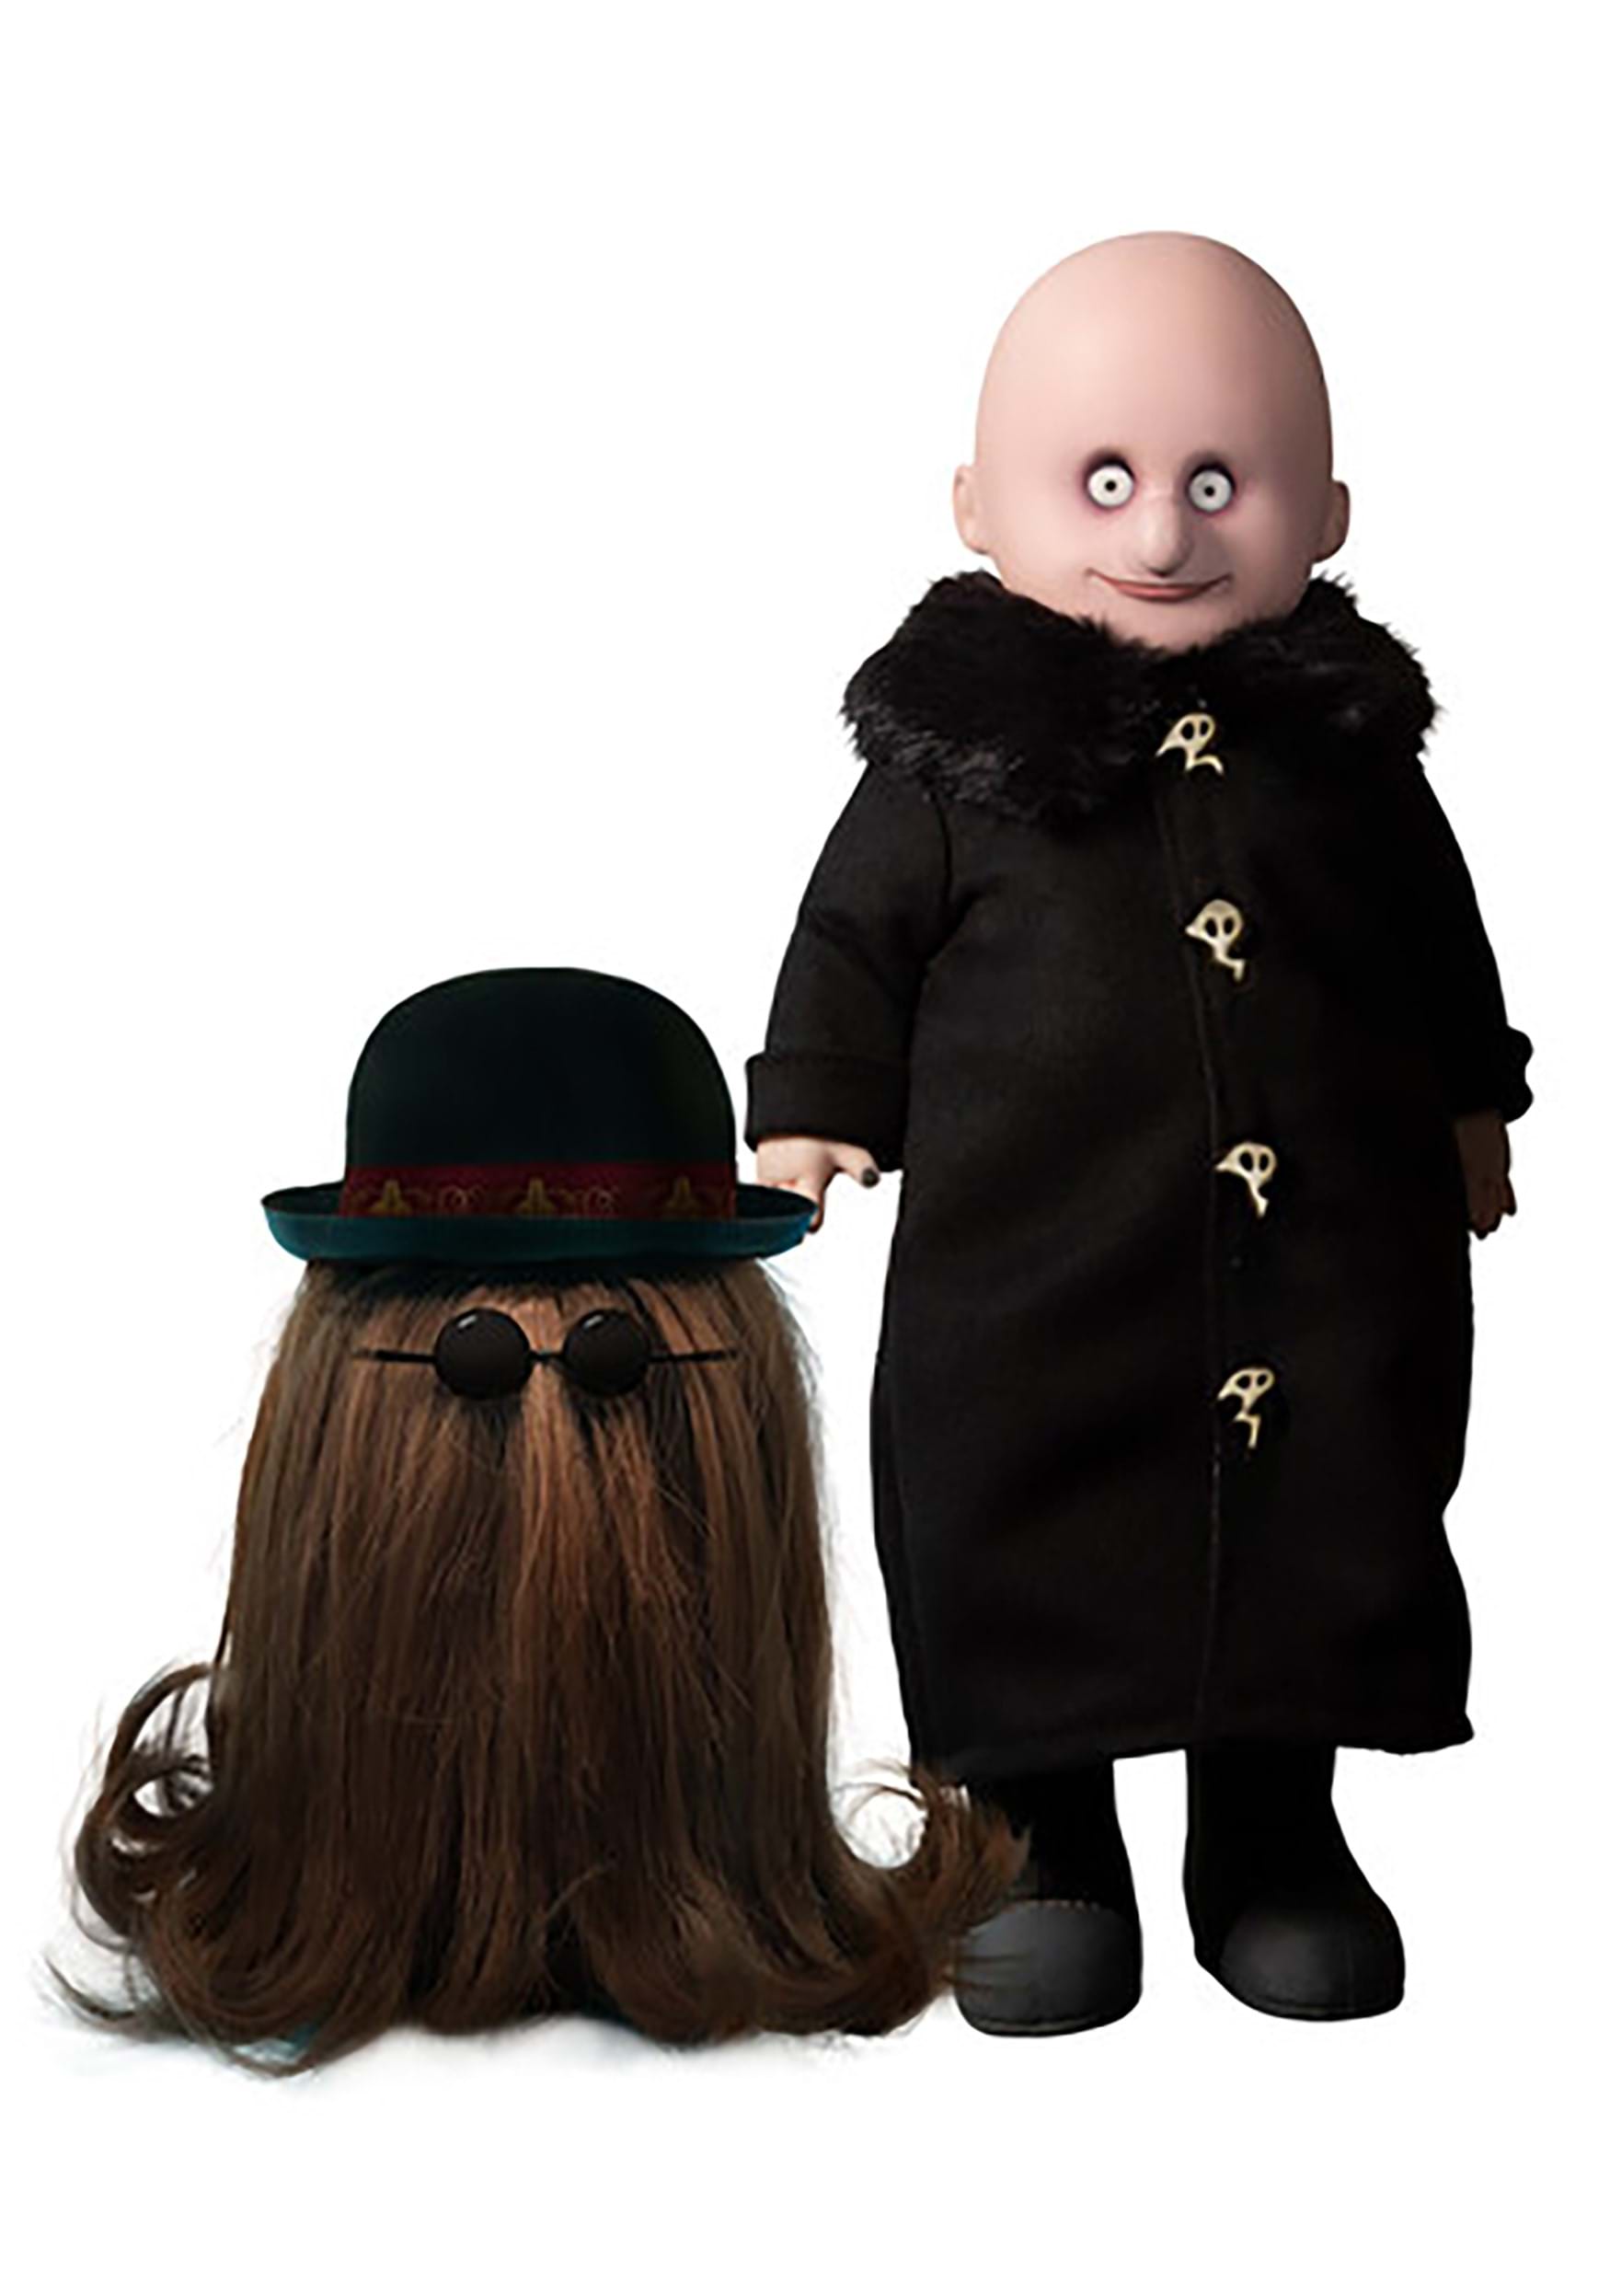 The Addams Family Fester and It Living Dead Dolls